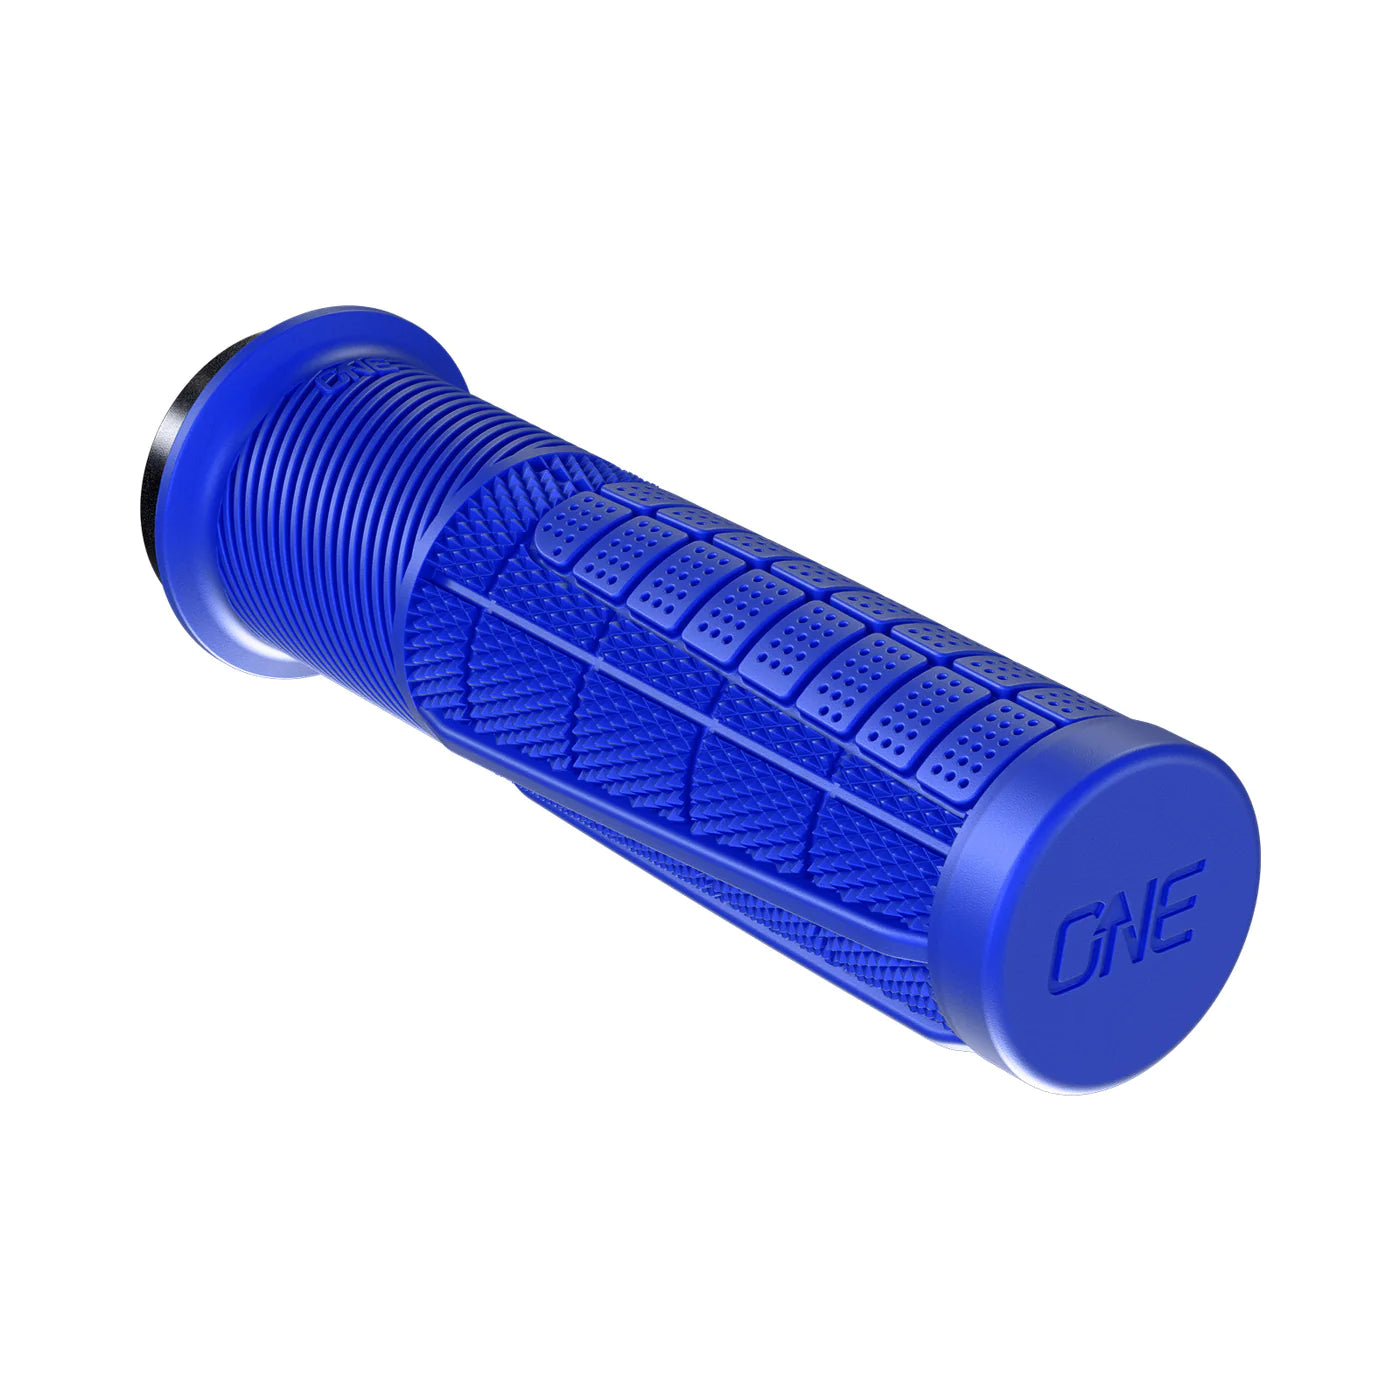 Oneup Thick Grips